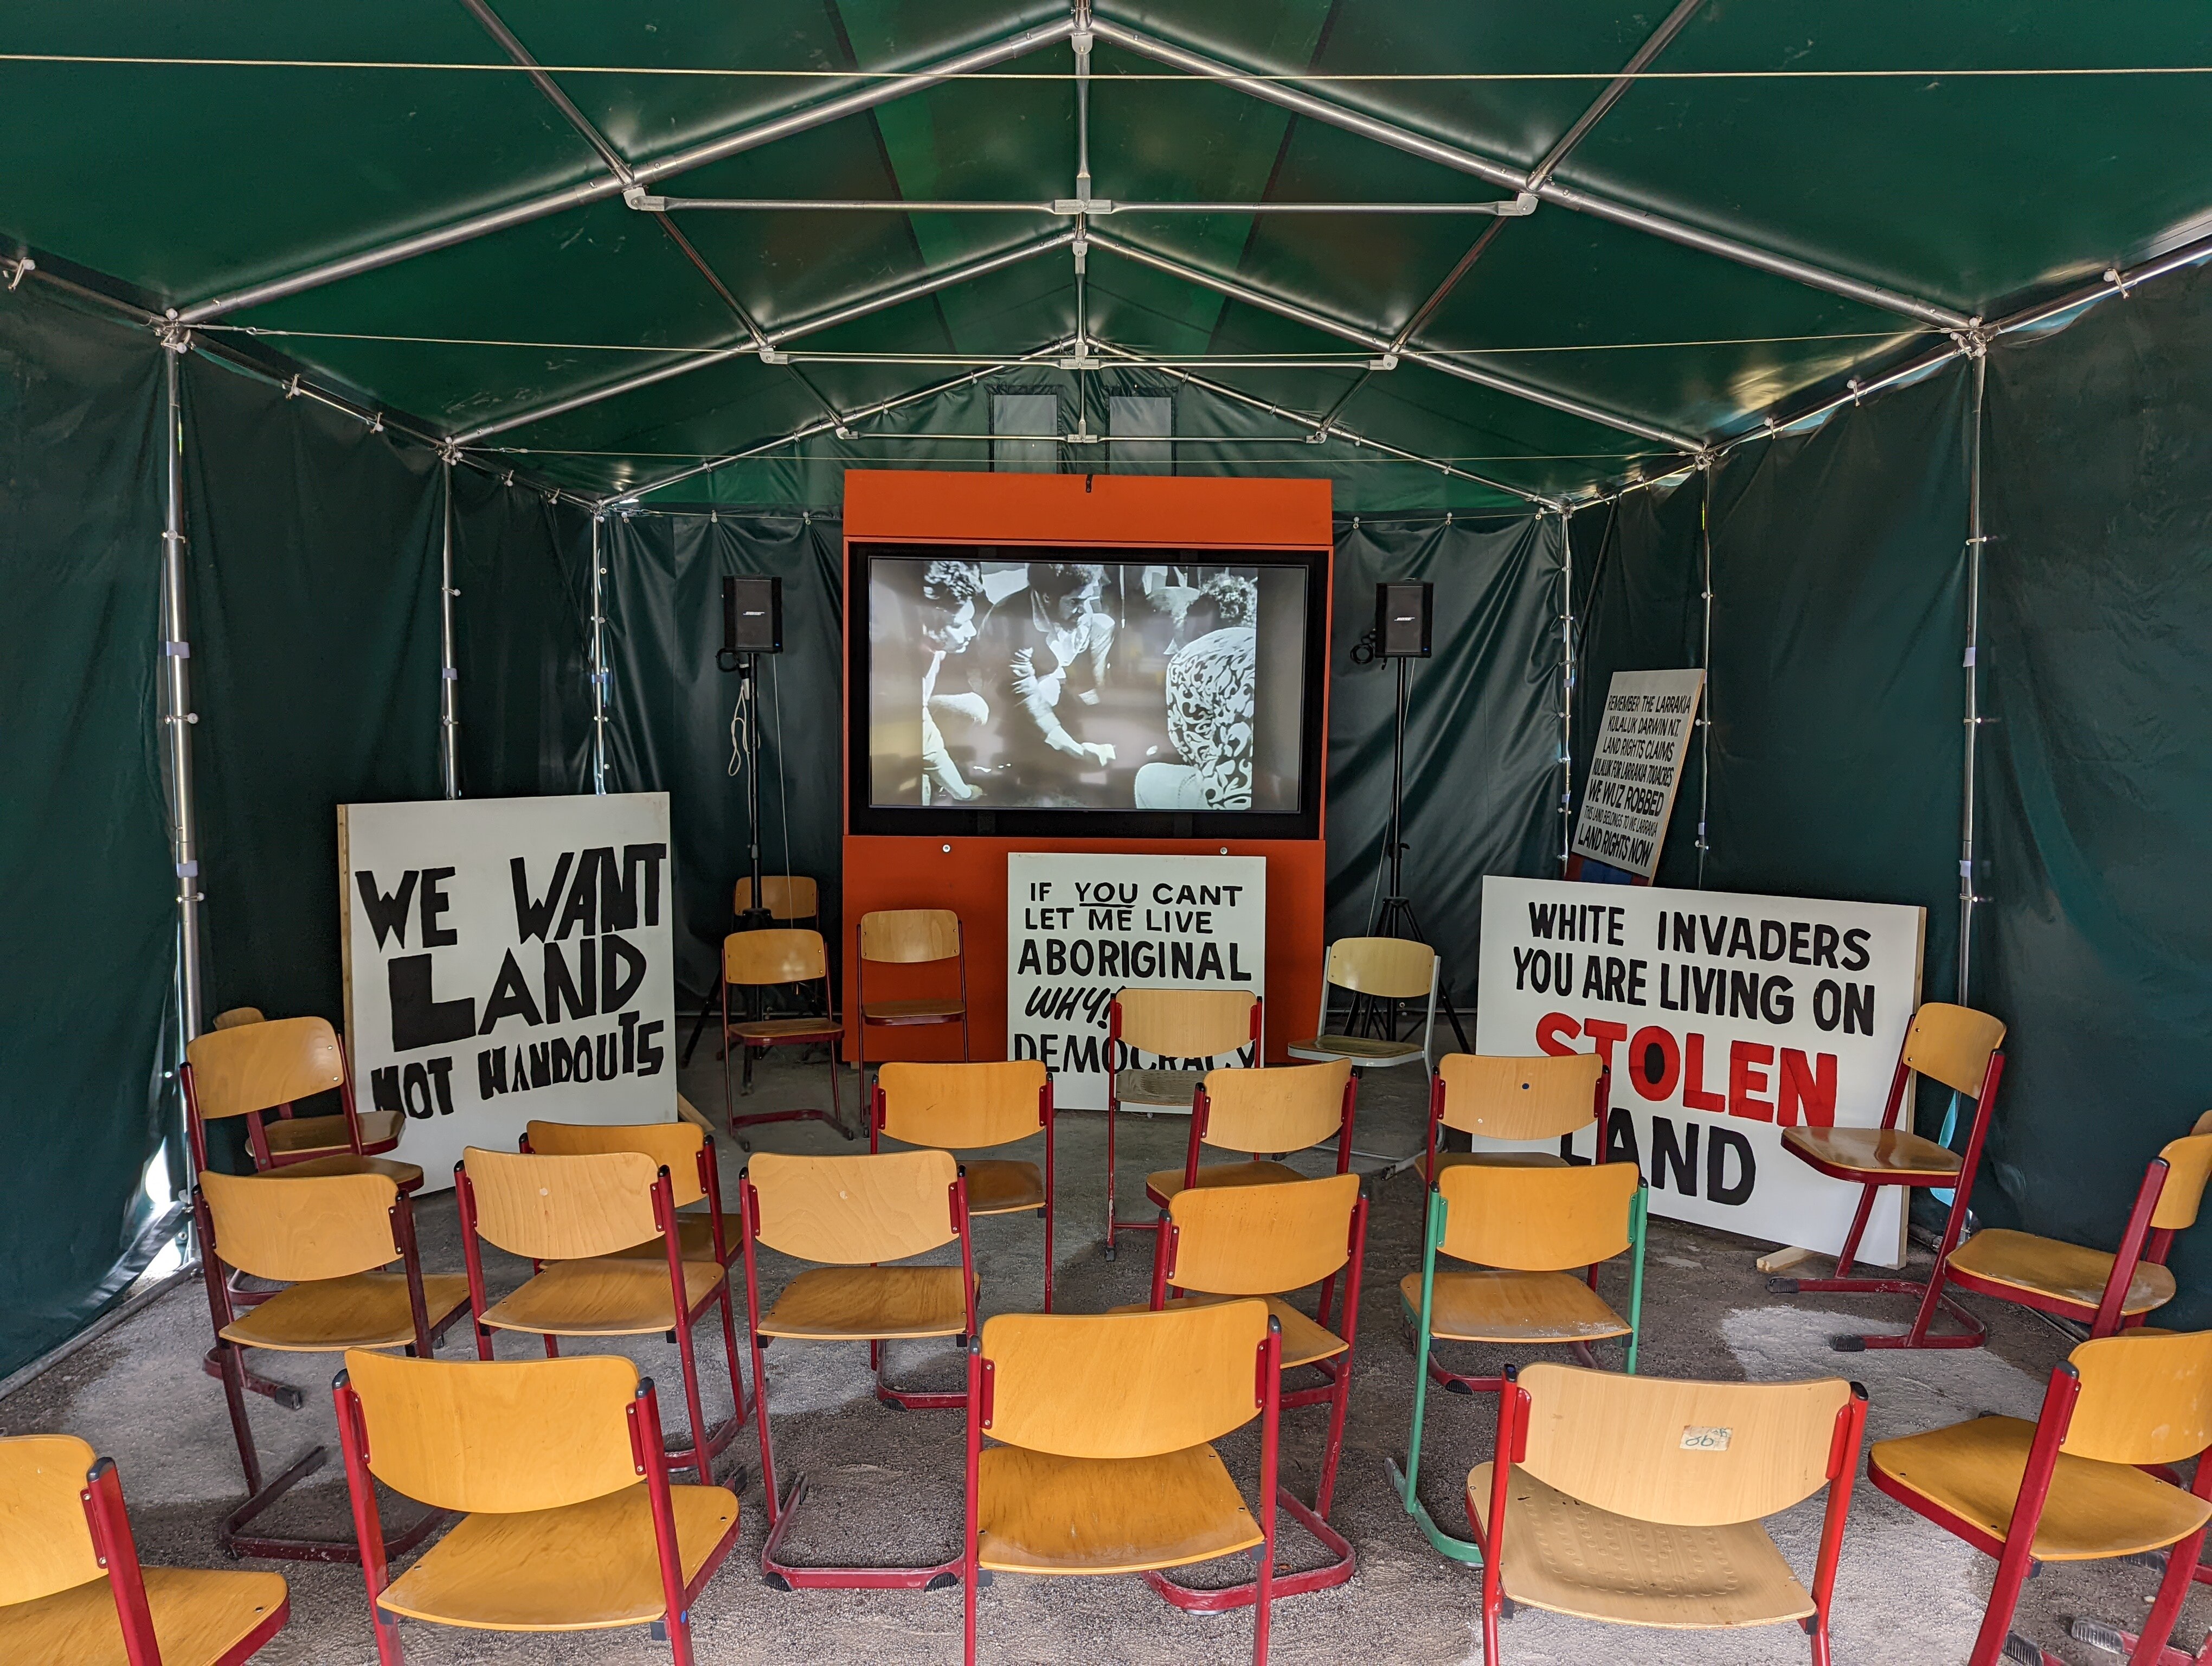 The inside of a large green tent with chairs set in front of a screen featuring black and white video and three protest placards